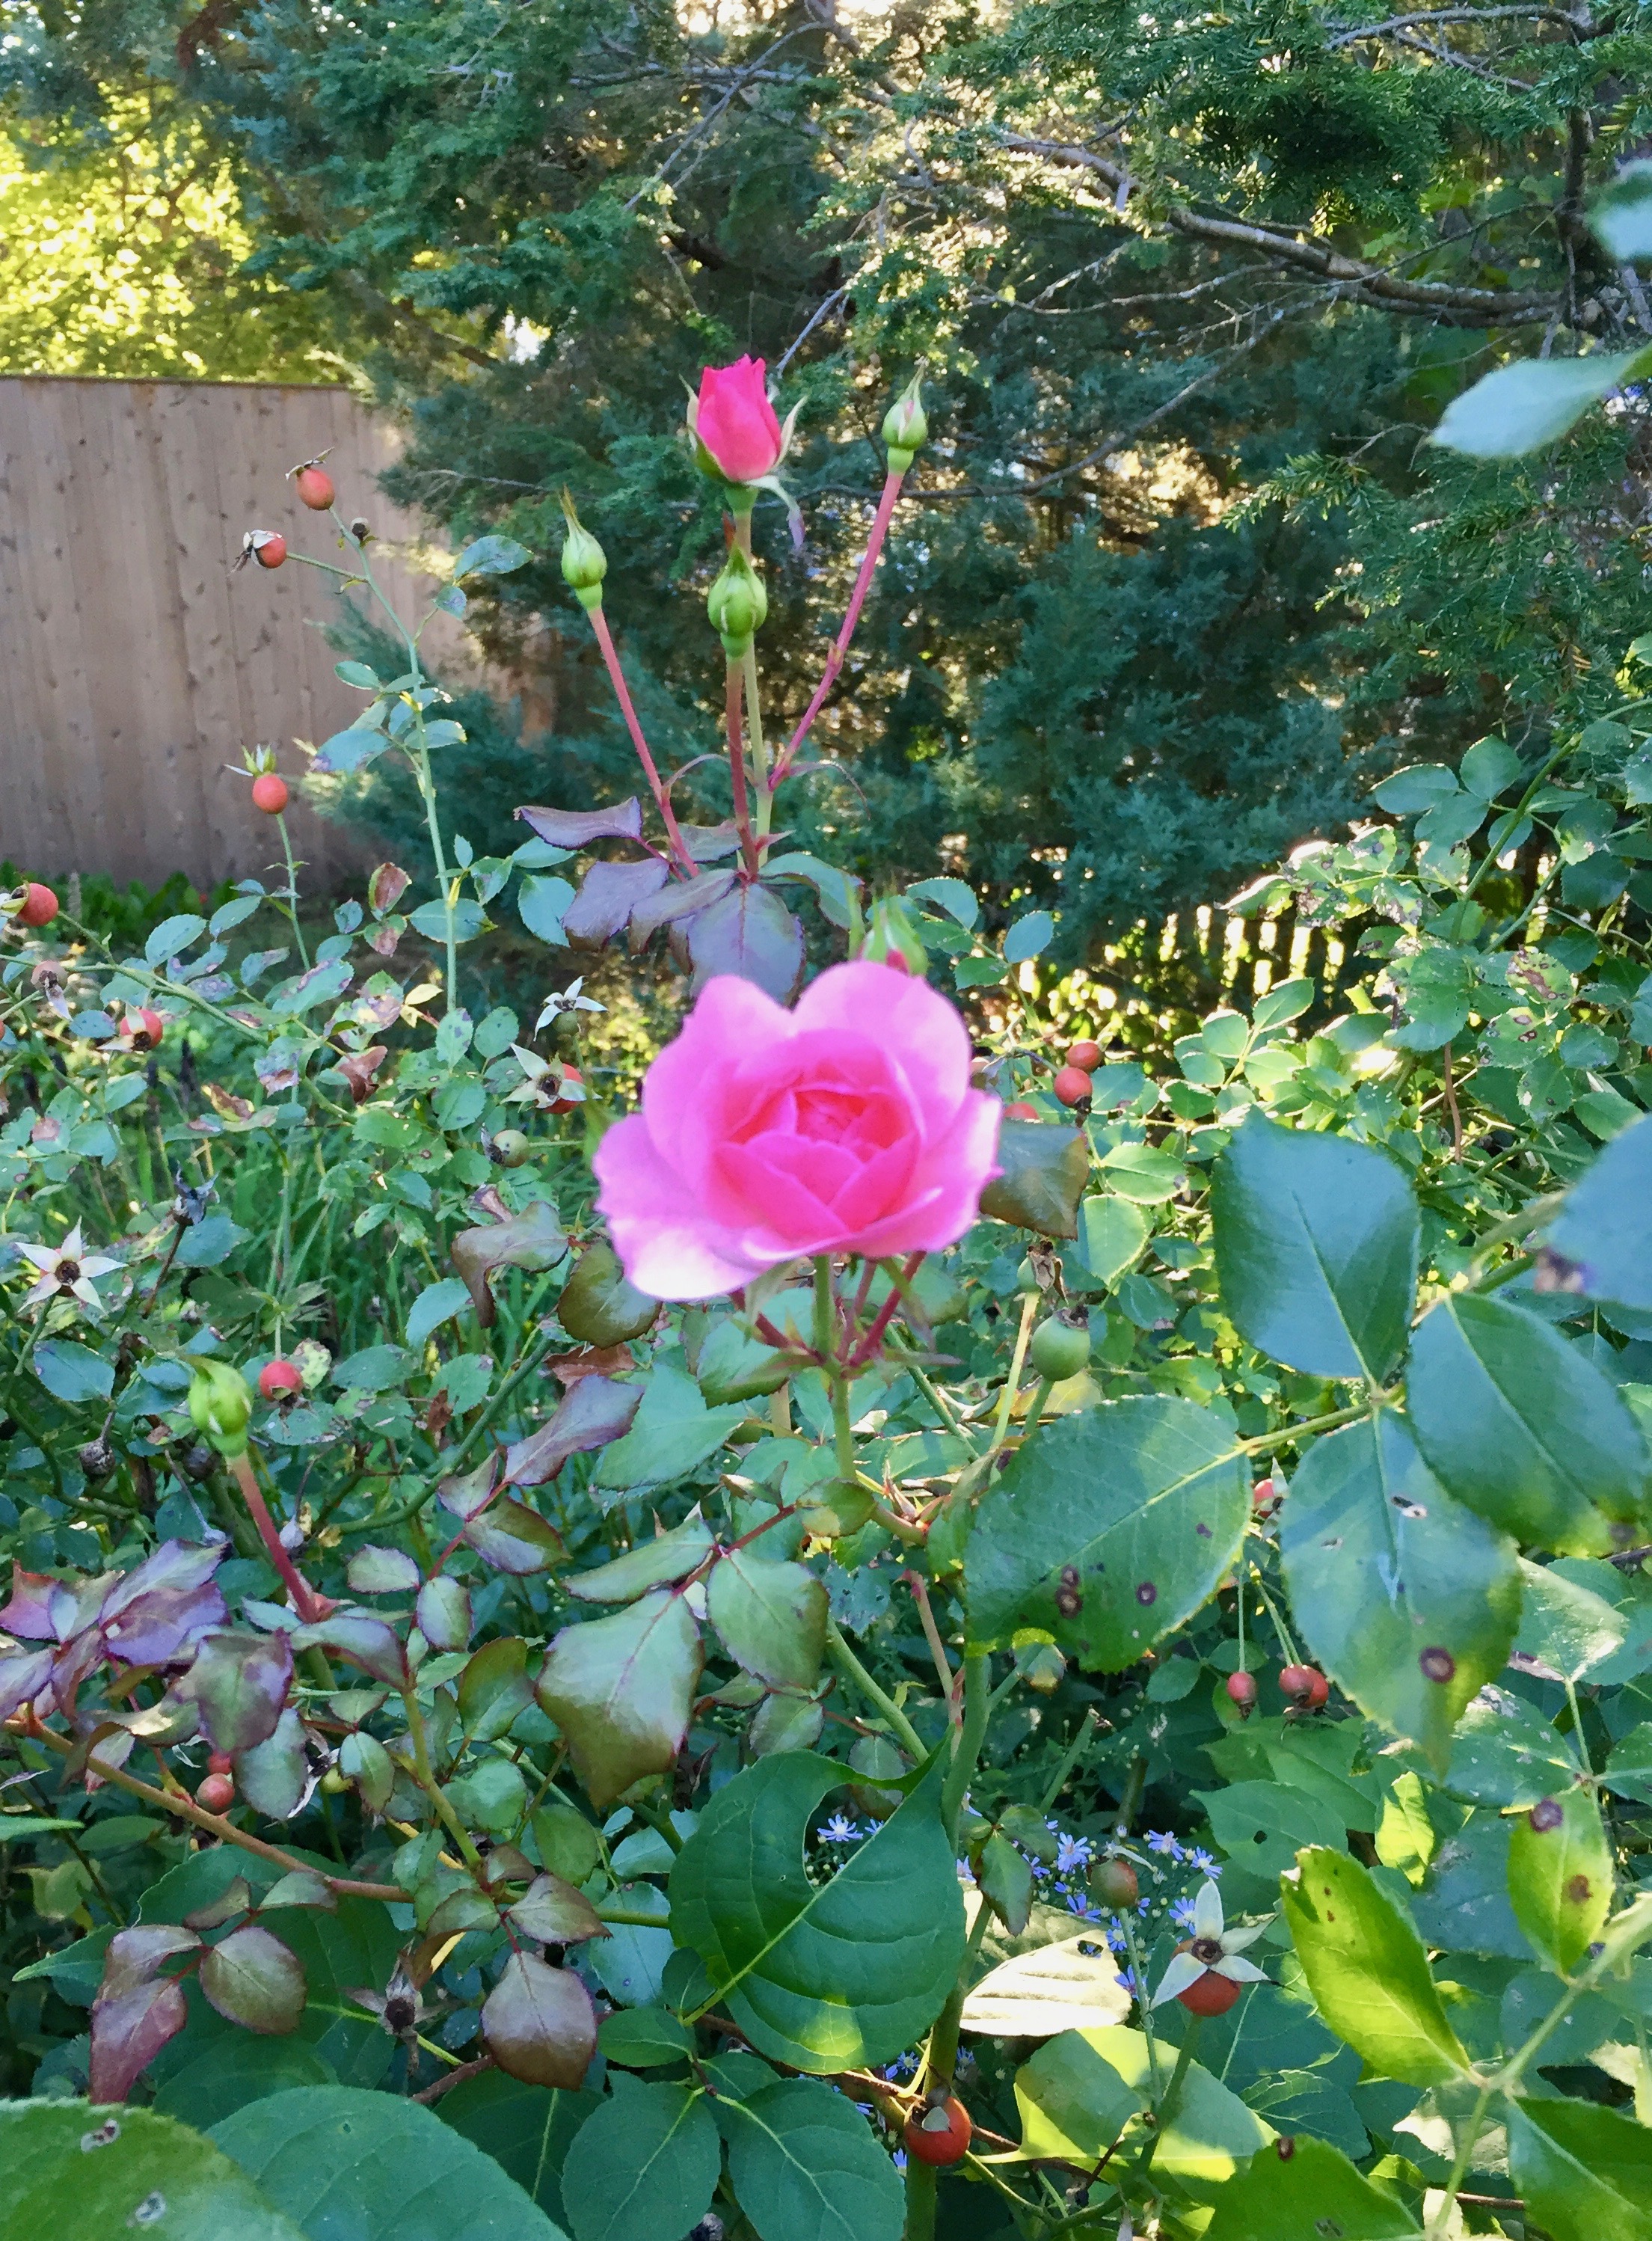 It's the weekend! Number 74, Autumn Roses in My Neighborhood